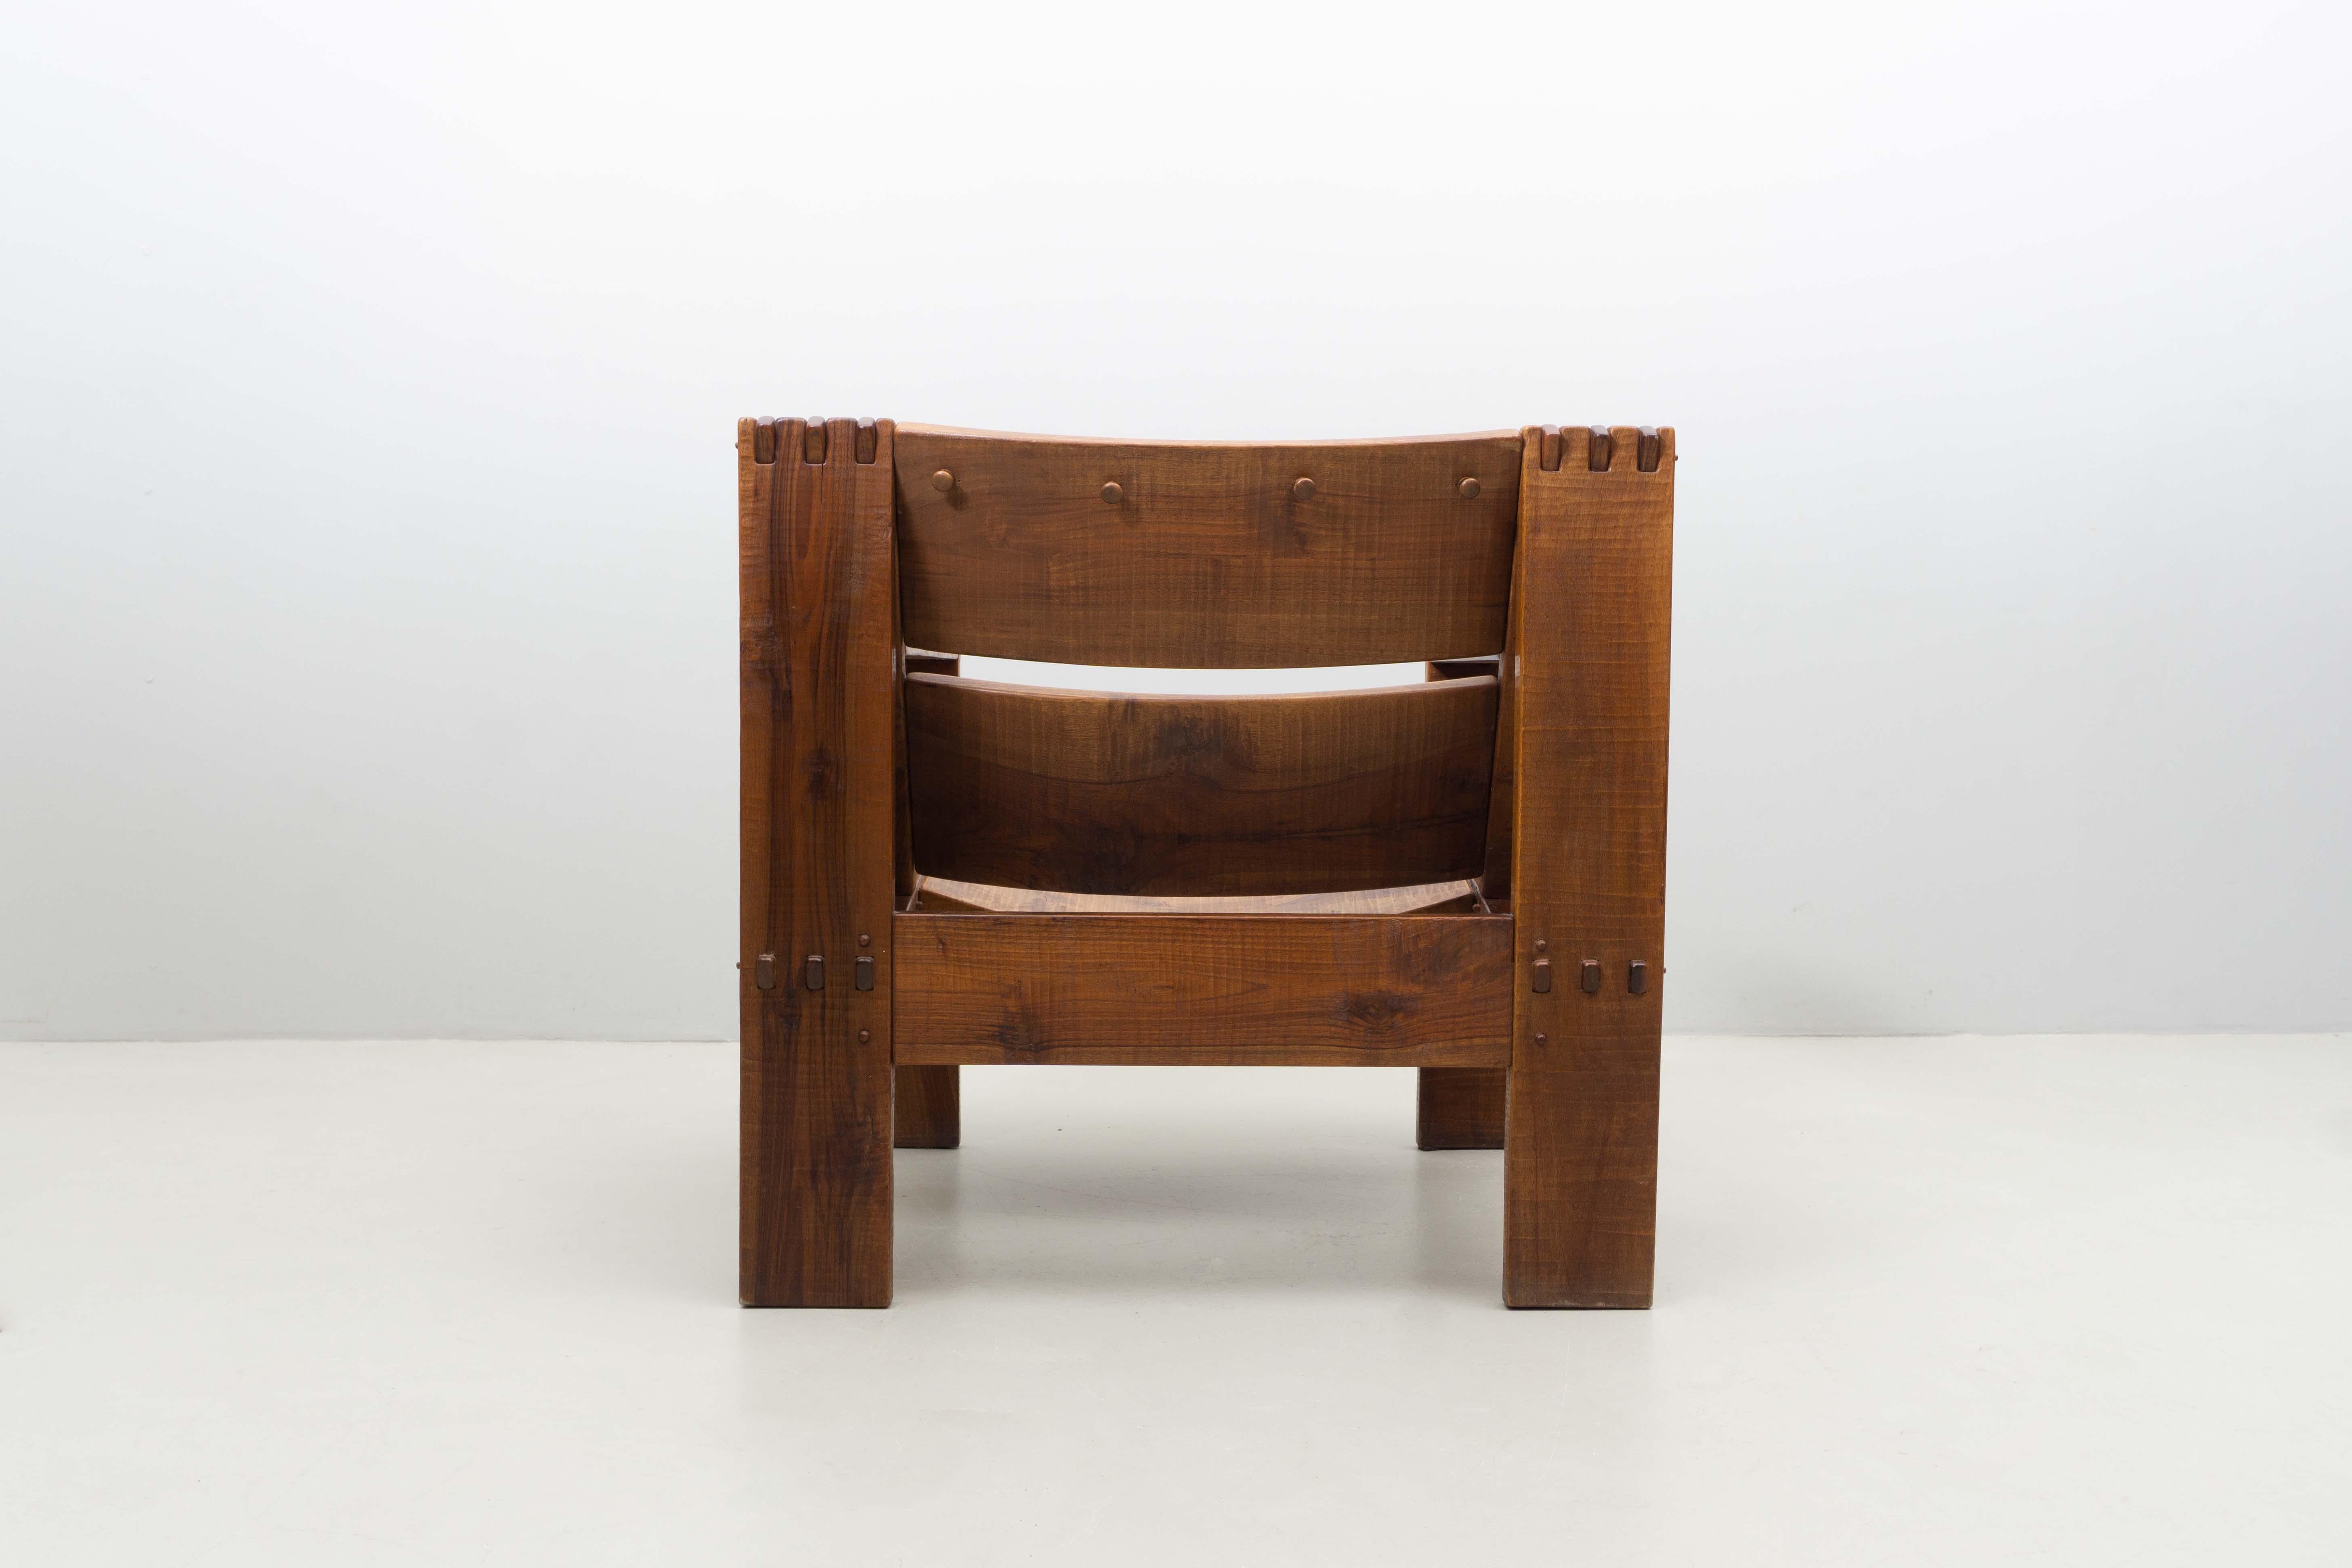 Italian Chairs with Armrests by Guiseppe Rivadossi, ca. 1970